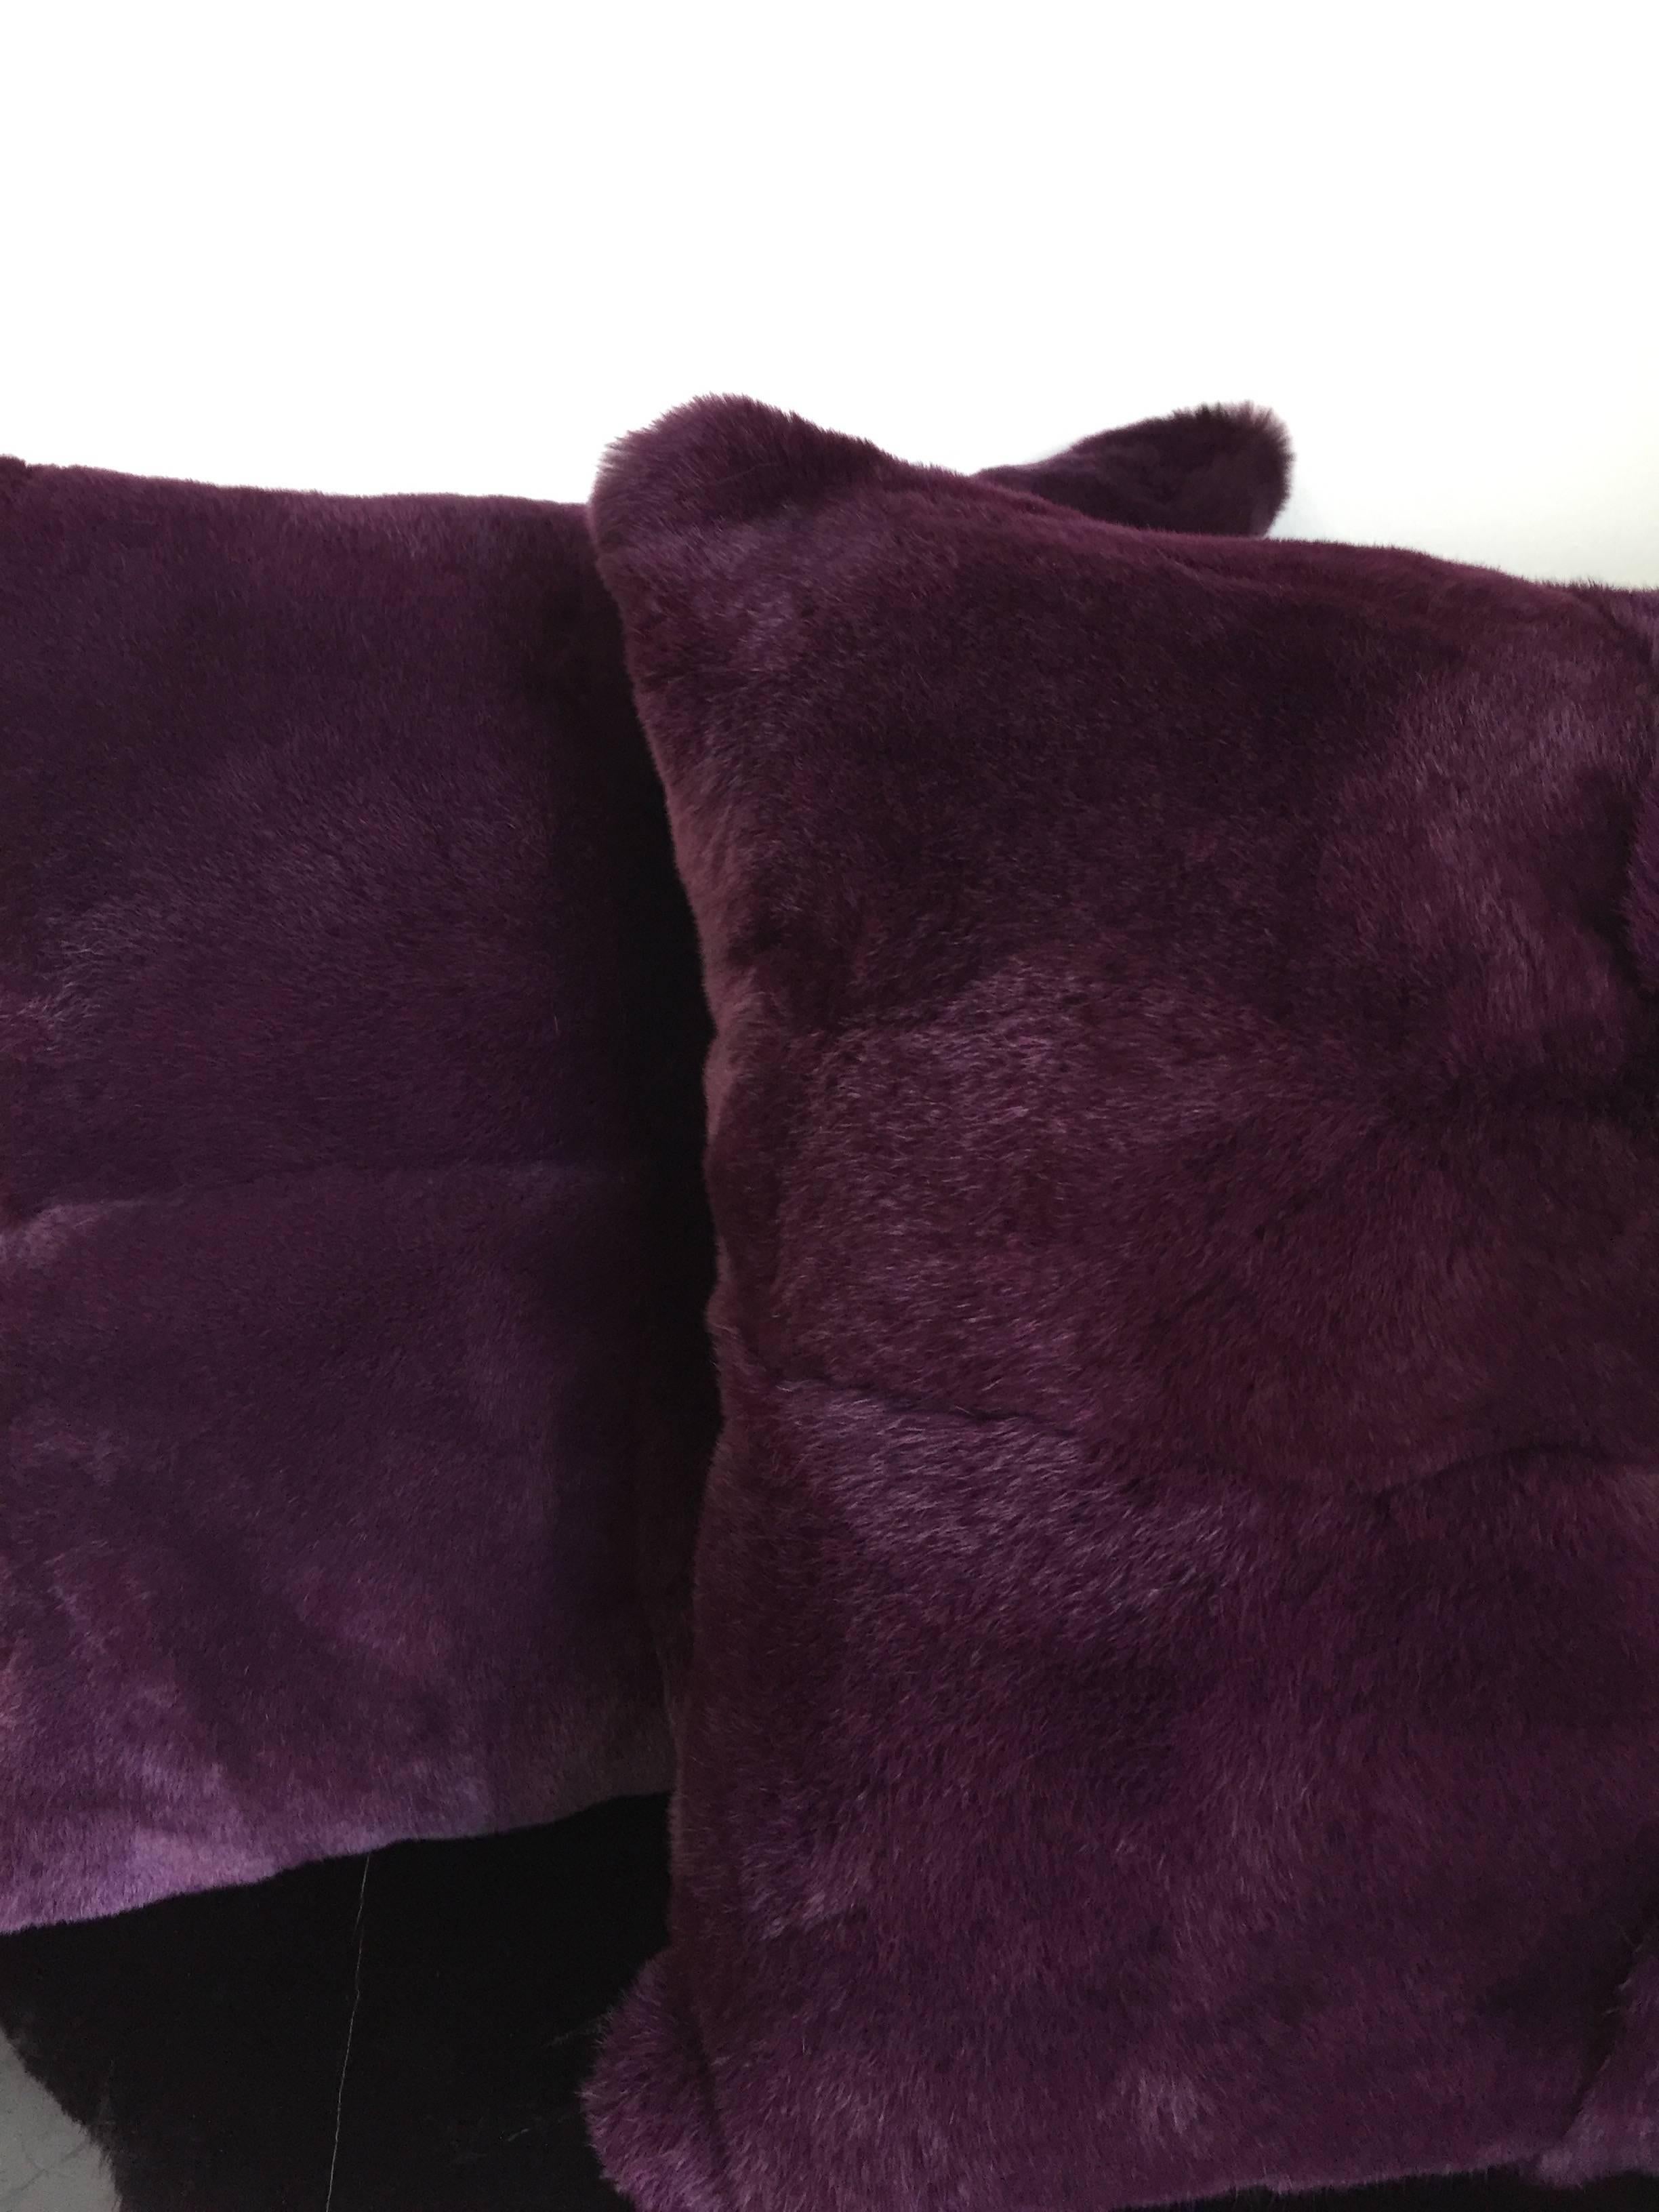 Pair of cushions front panel rex rabbit colour dyed in purple, front panel is made of four skins, back side silk satin colour green, size 50 x 50cm, cushion covers with cotton lining, concealed zipper, feather inner with new feathers, 